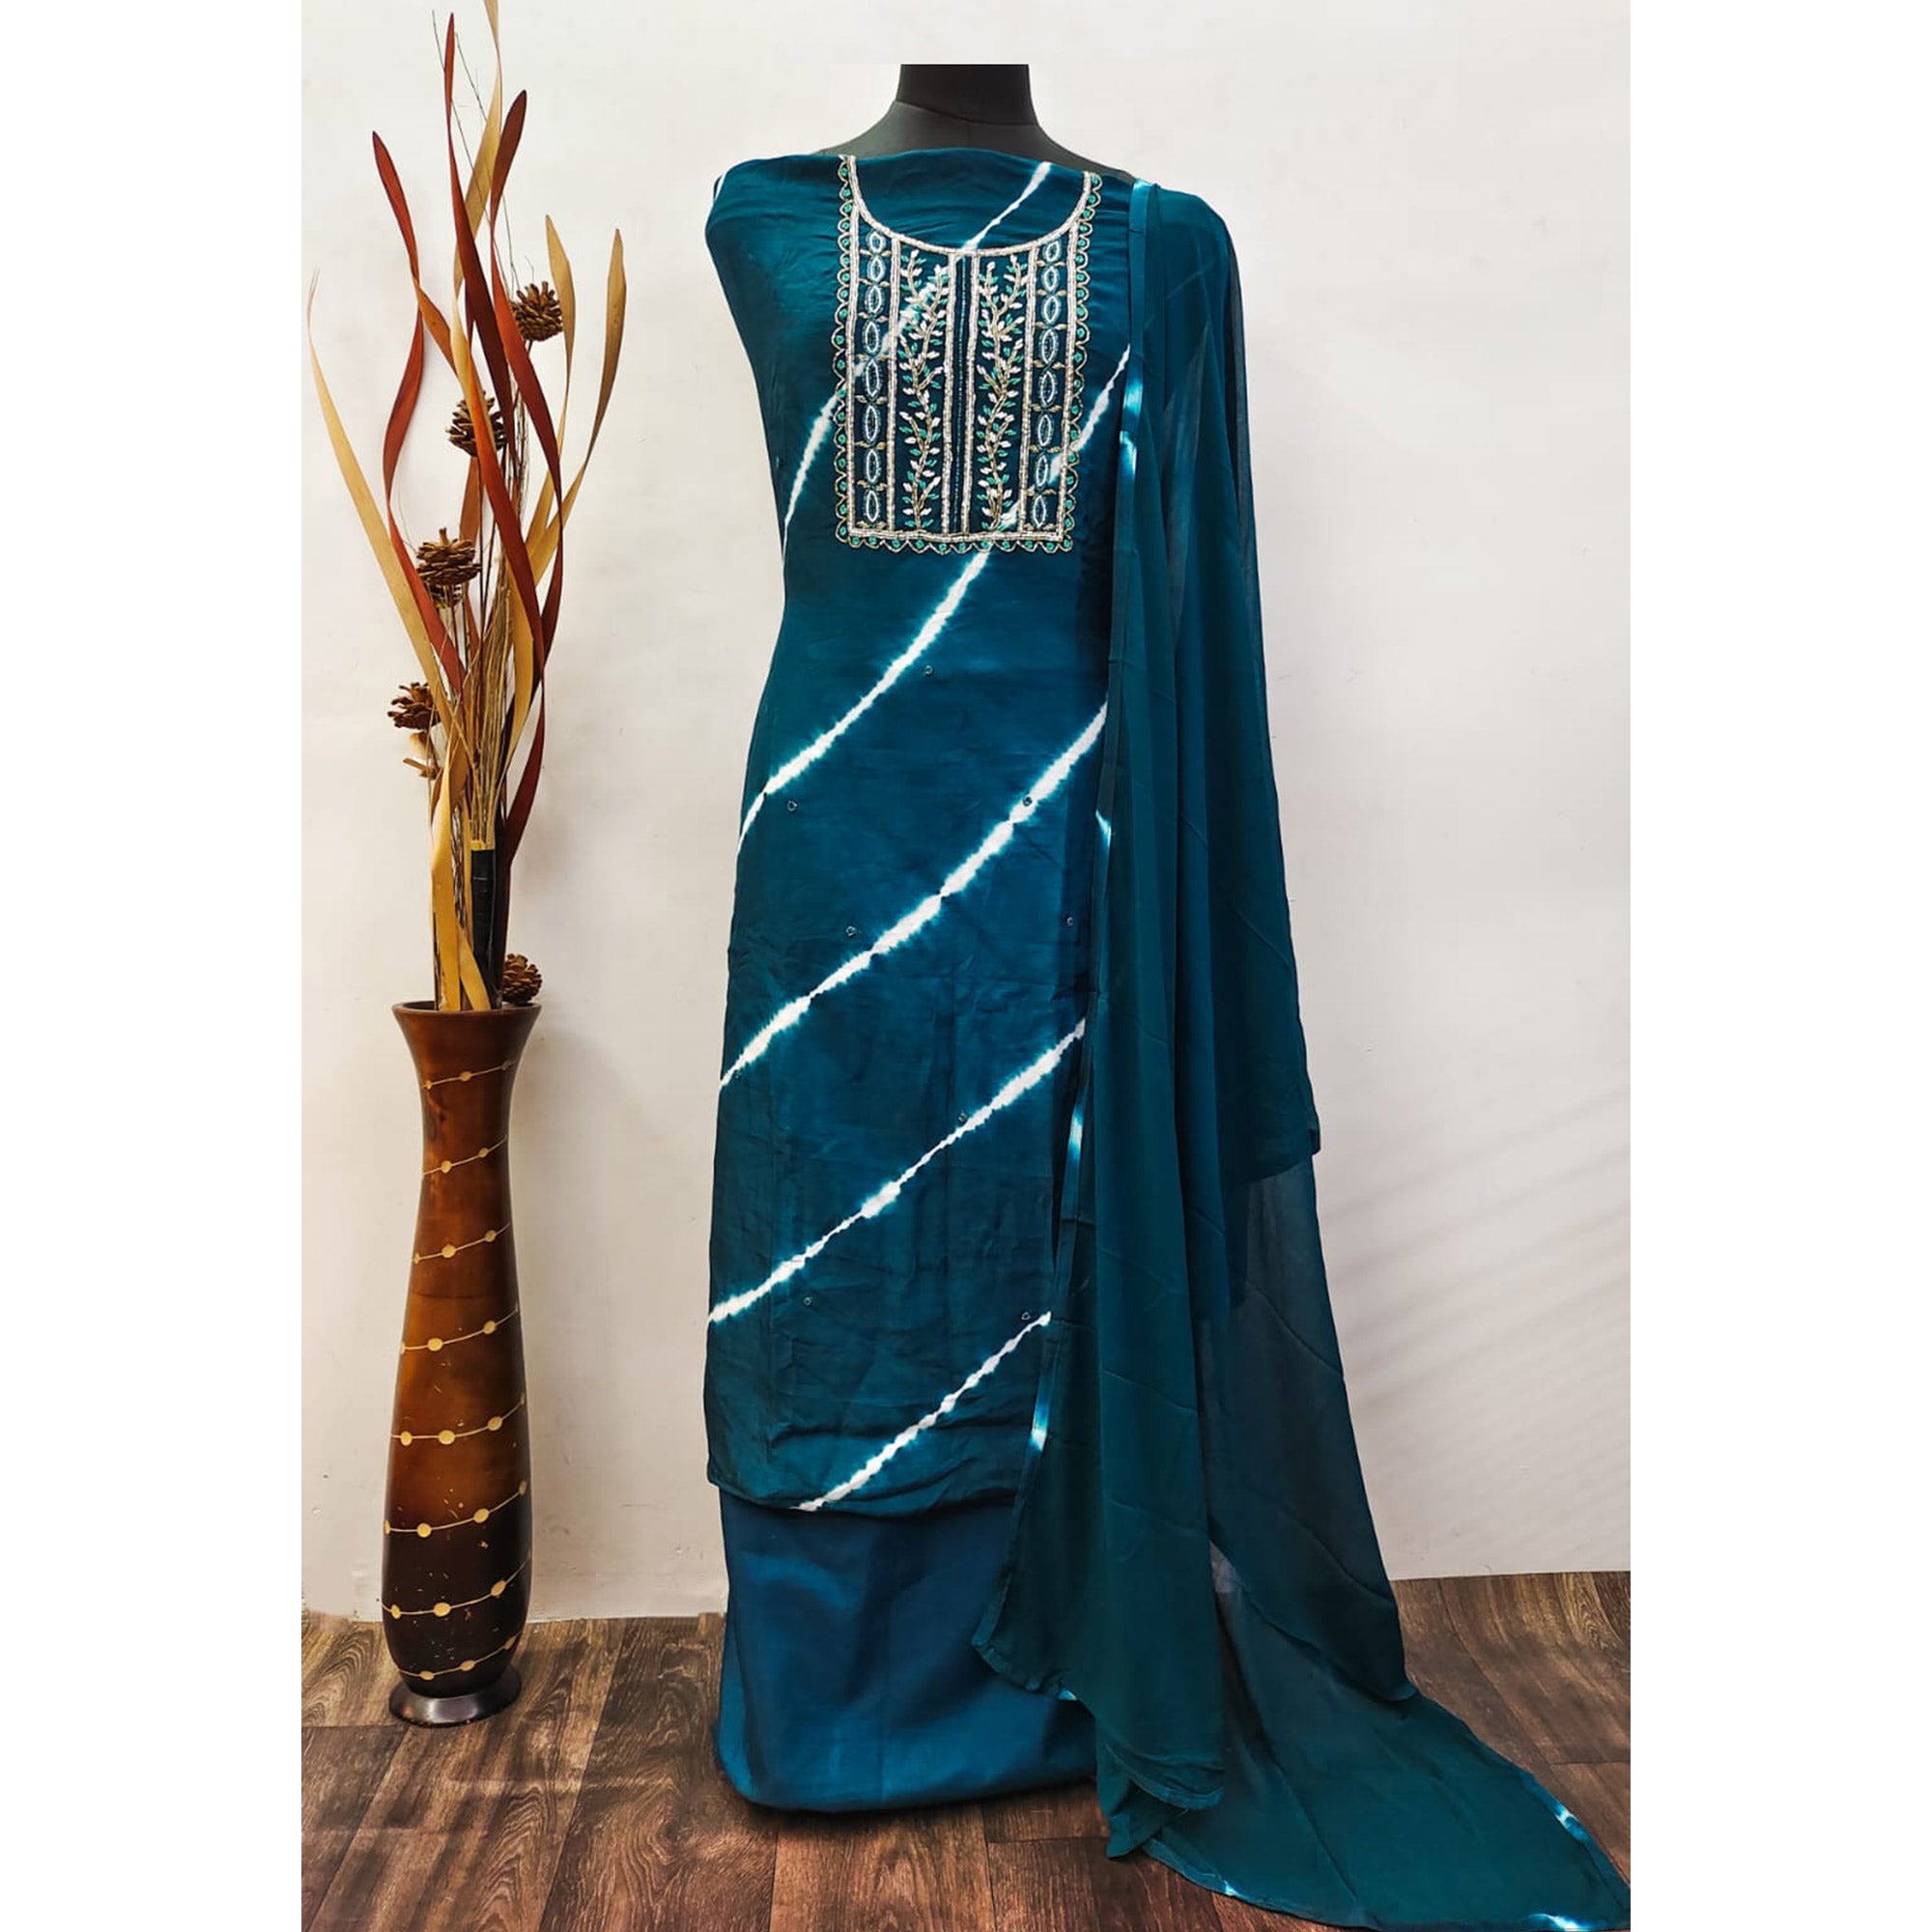 Morpich Handwork Embroidery With Leheriya Printed Viscose Dress Material